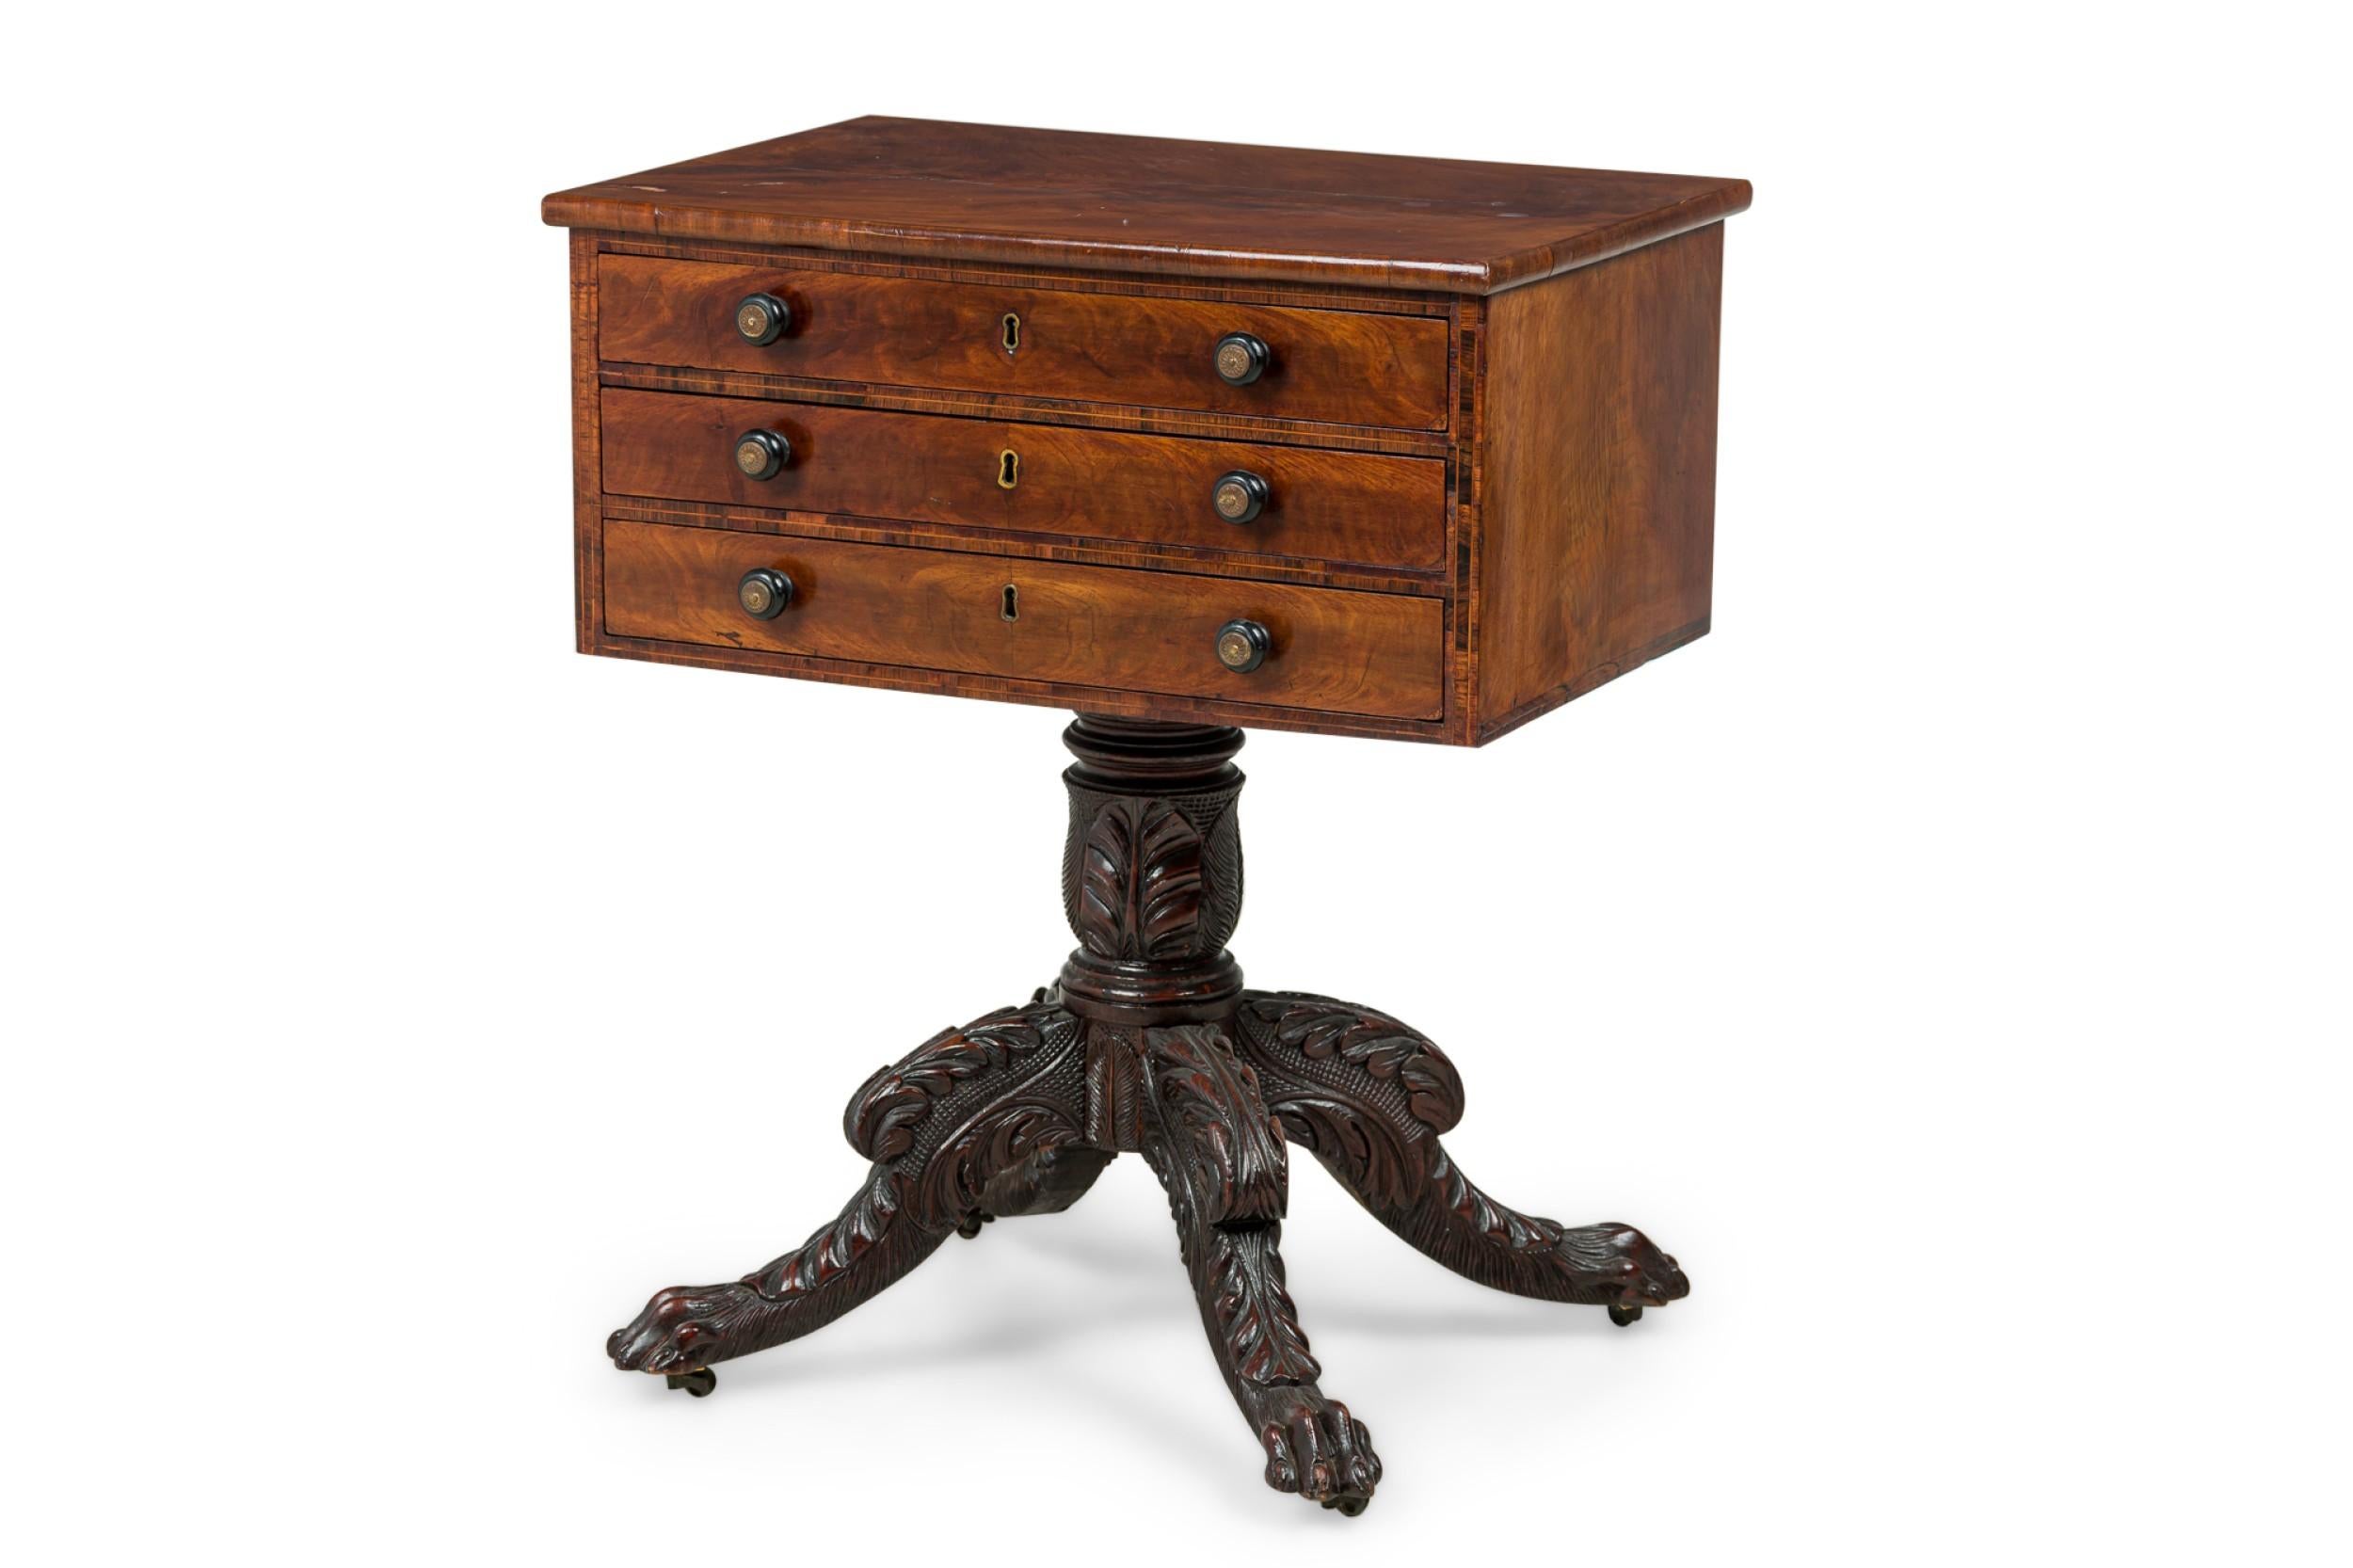 American Empire mahogany side table with three draws supported on a pedestal base and standing on 4 carved legs (ATTRIBUTED TO: DUNCAN PHYFE)
